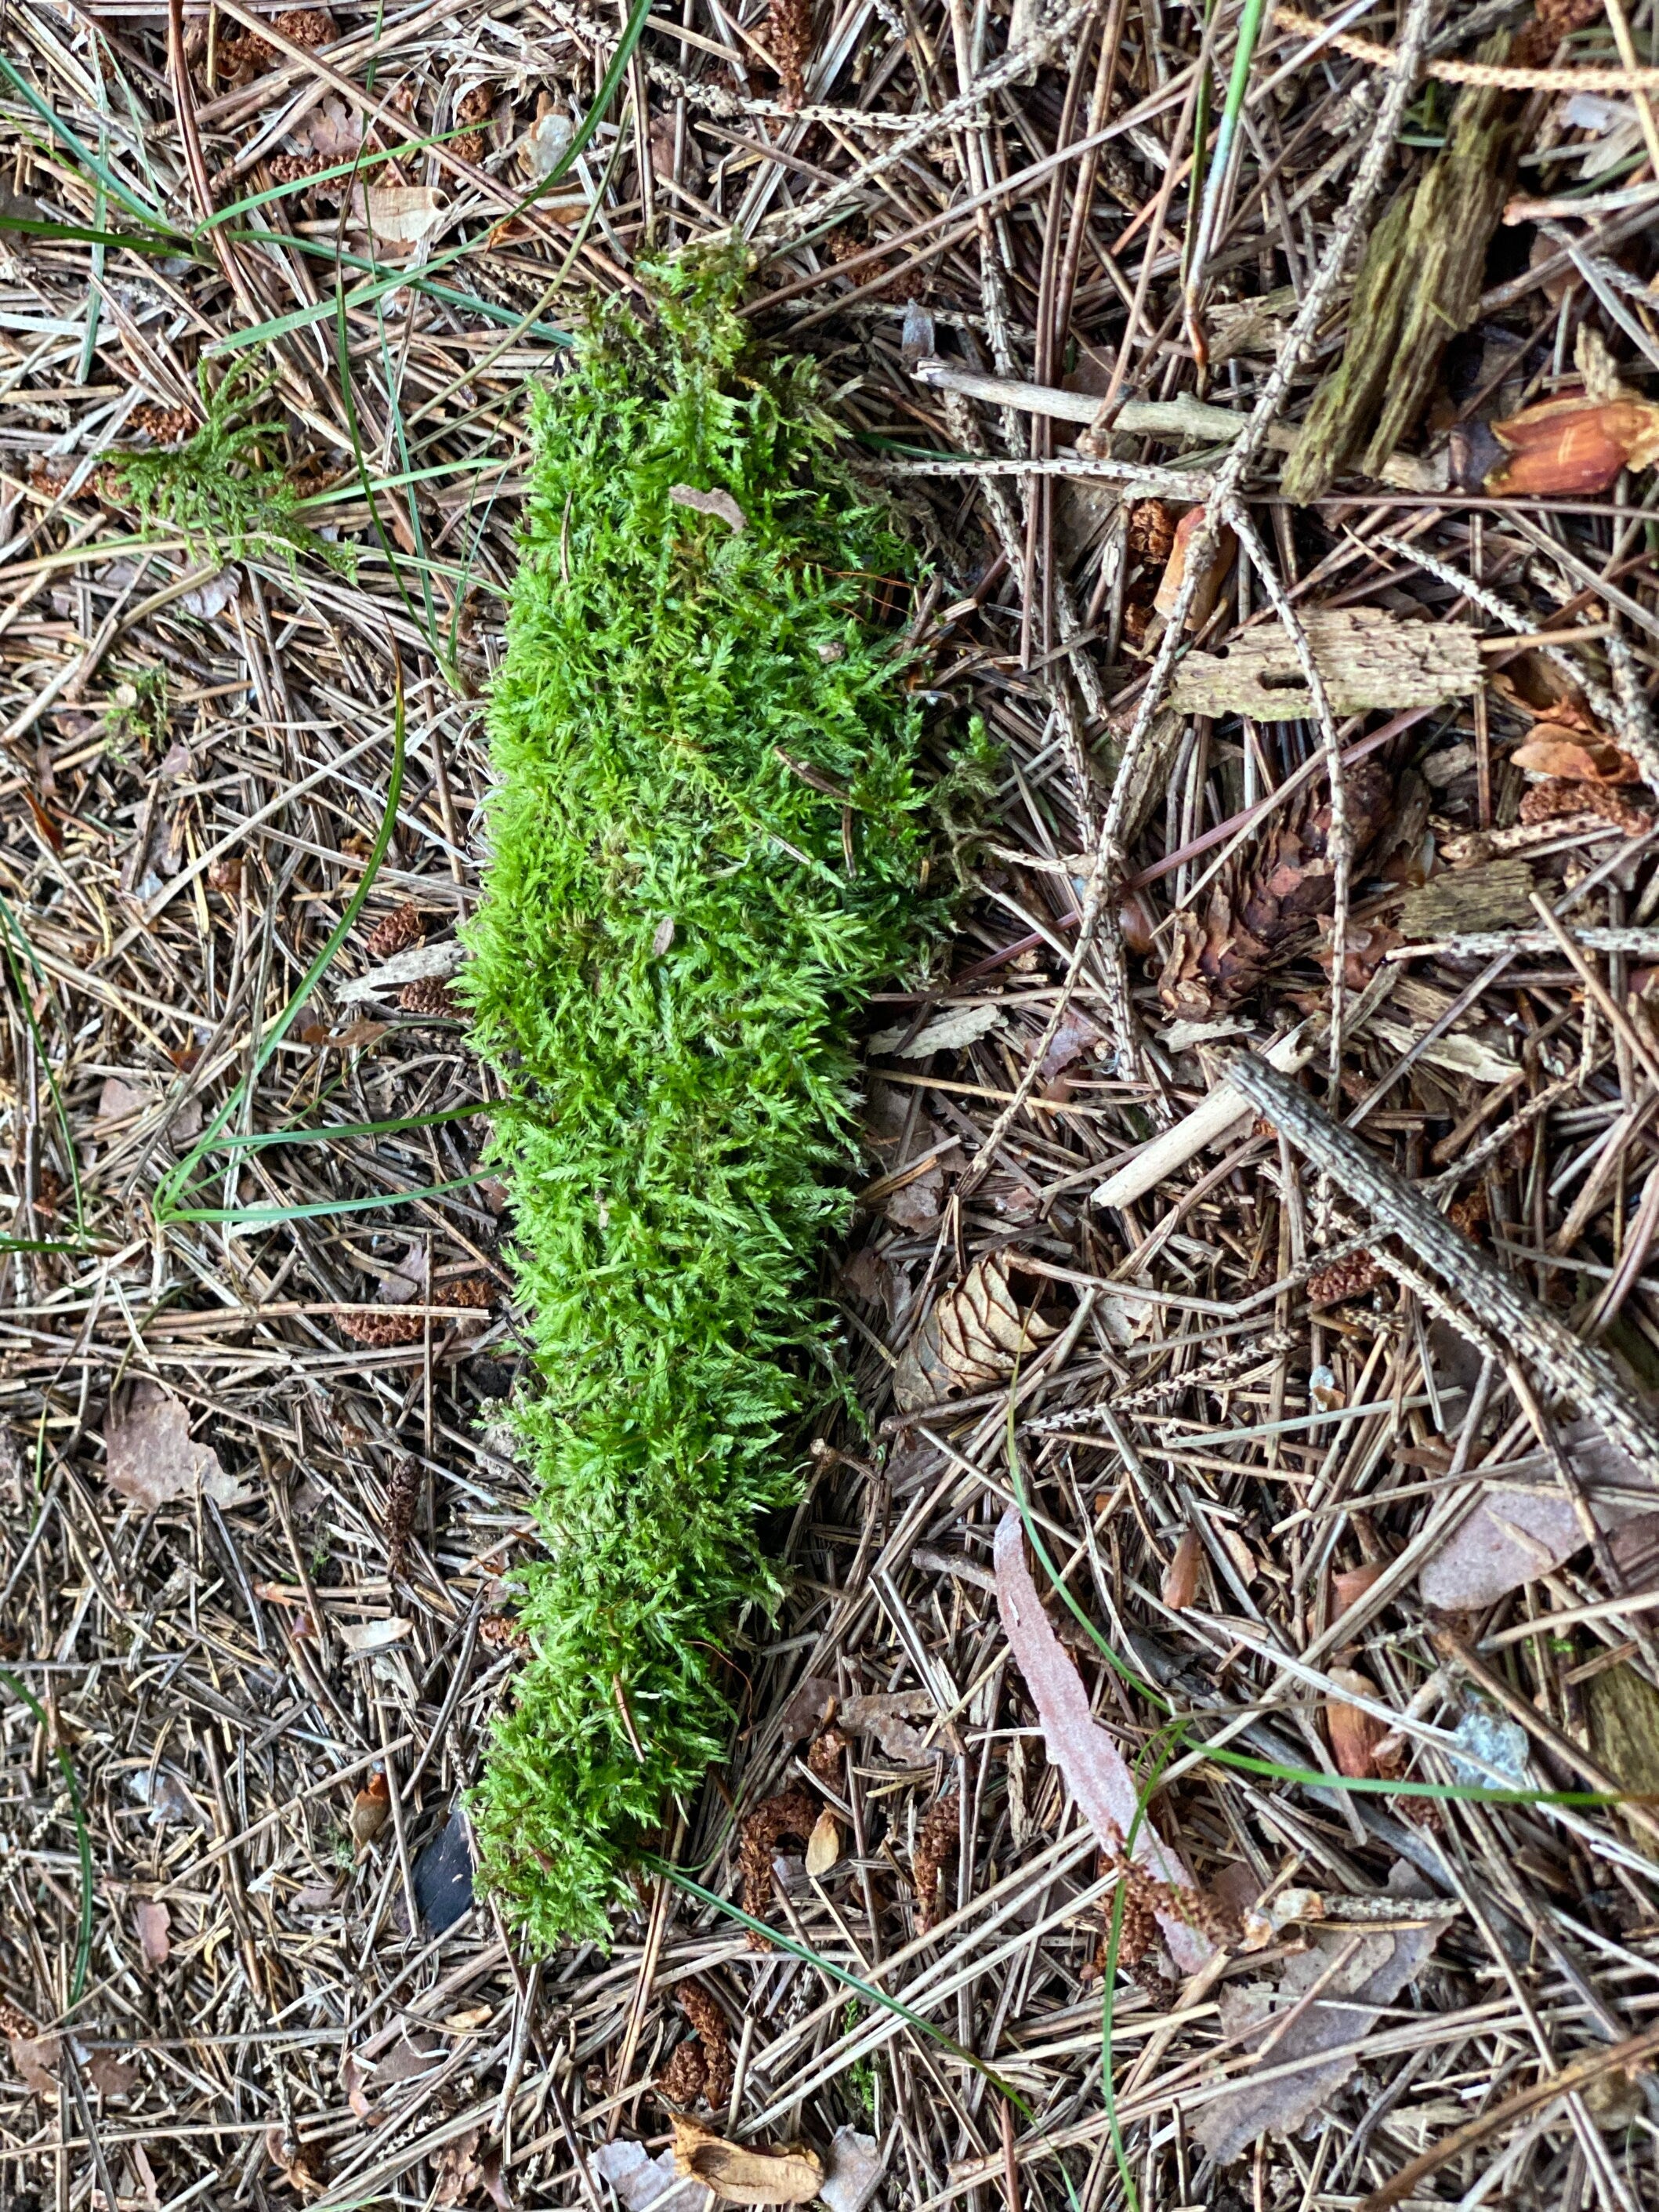 Live Moss on a Log, Mossy Log Approximately 7 Inches Long with a Width of 2 Inches